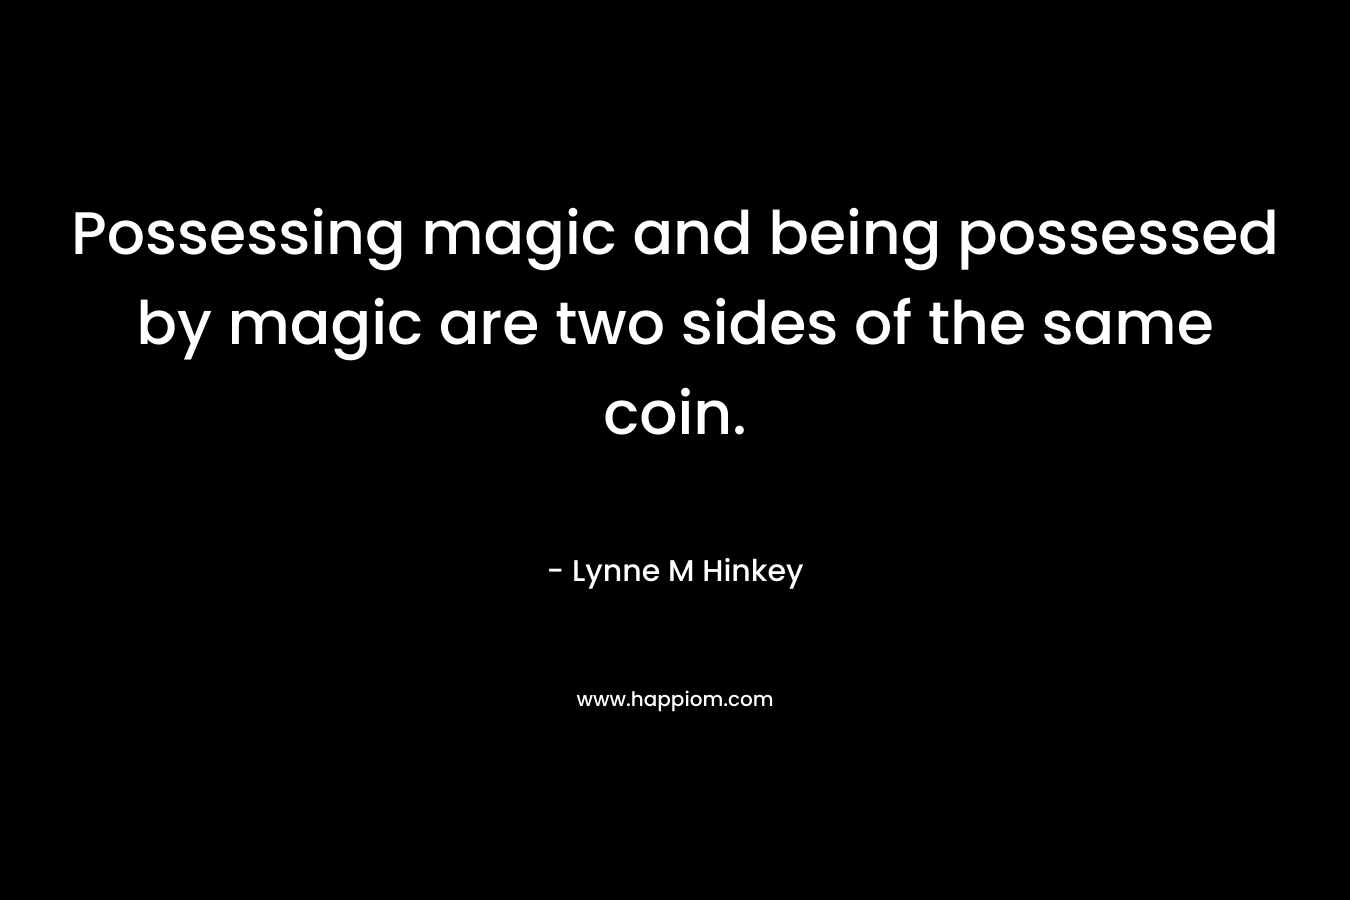 Possessing magic and being possessed by magic are two sides of the same coin. – Lynne M Hinkey